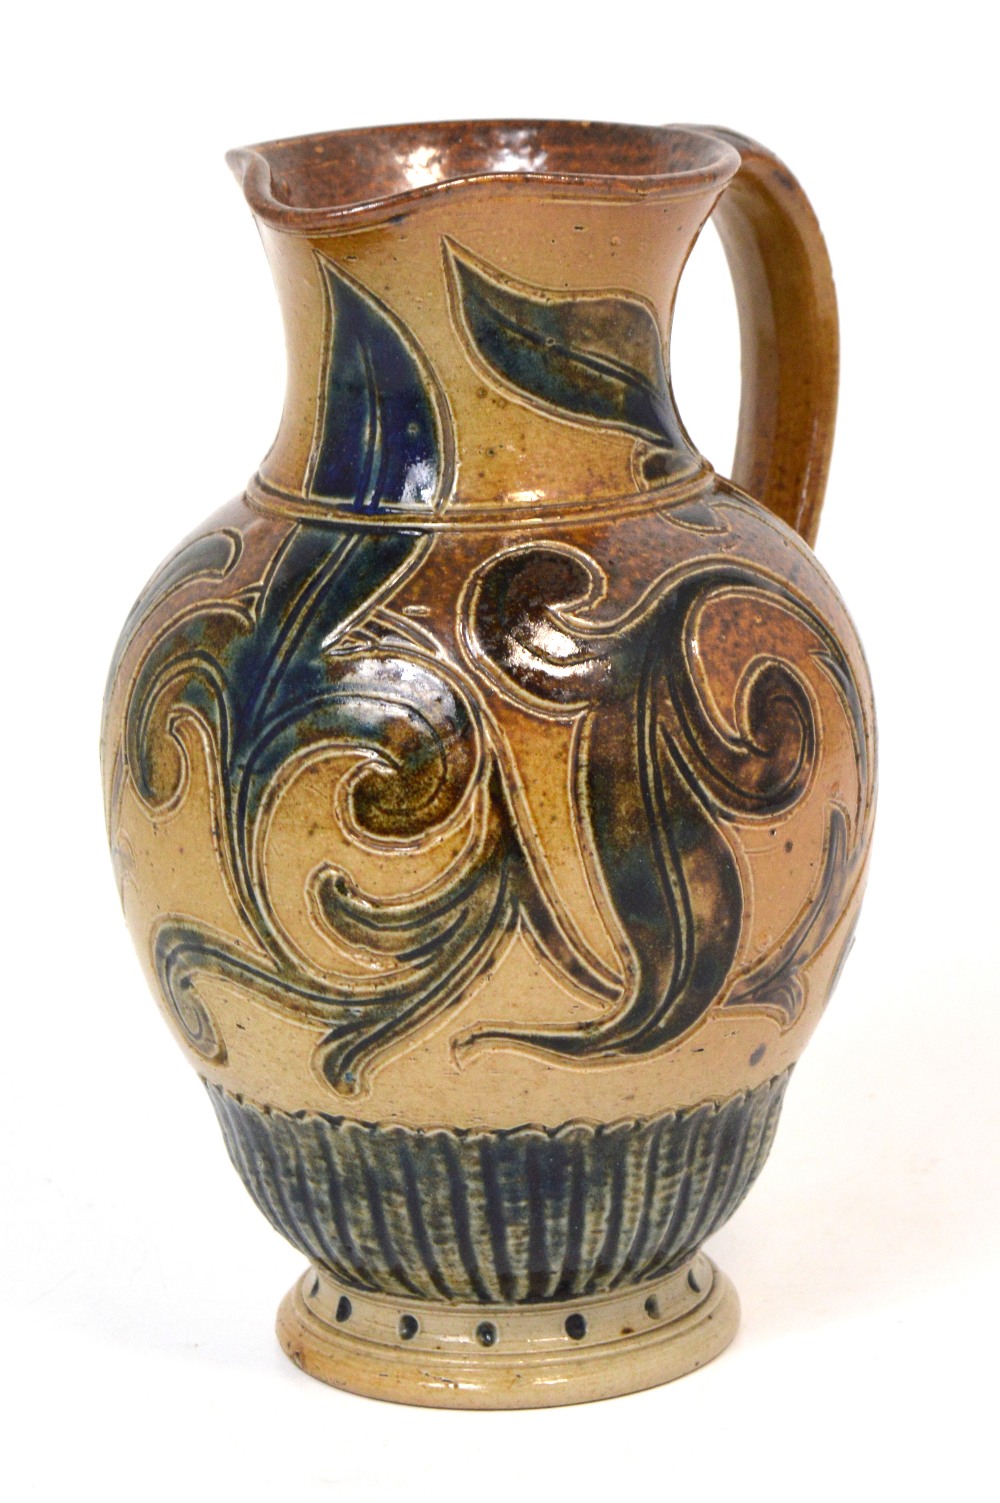 Arthur Barlow for Doulton Lambeth; a stoneware pitcher with stylised floral sgraffito decoration,